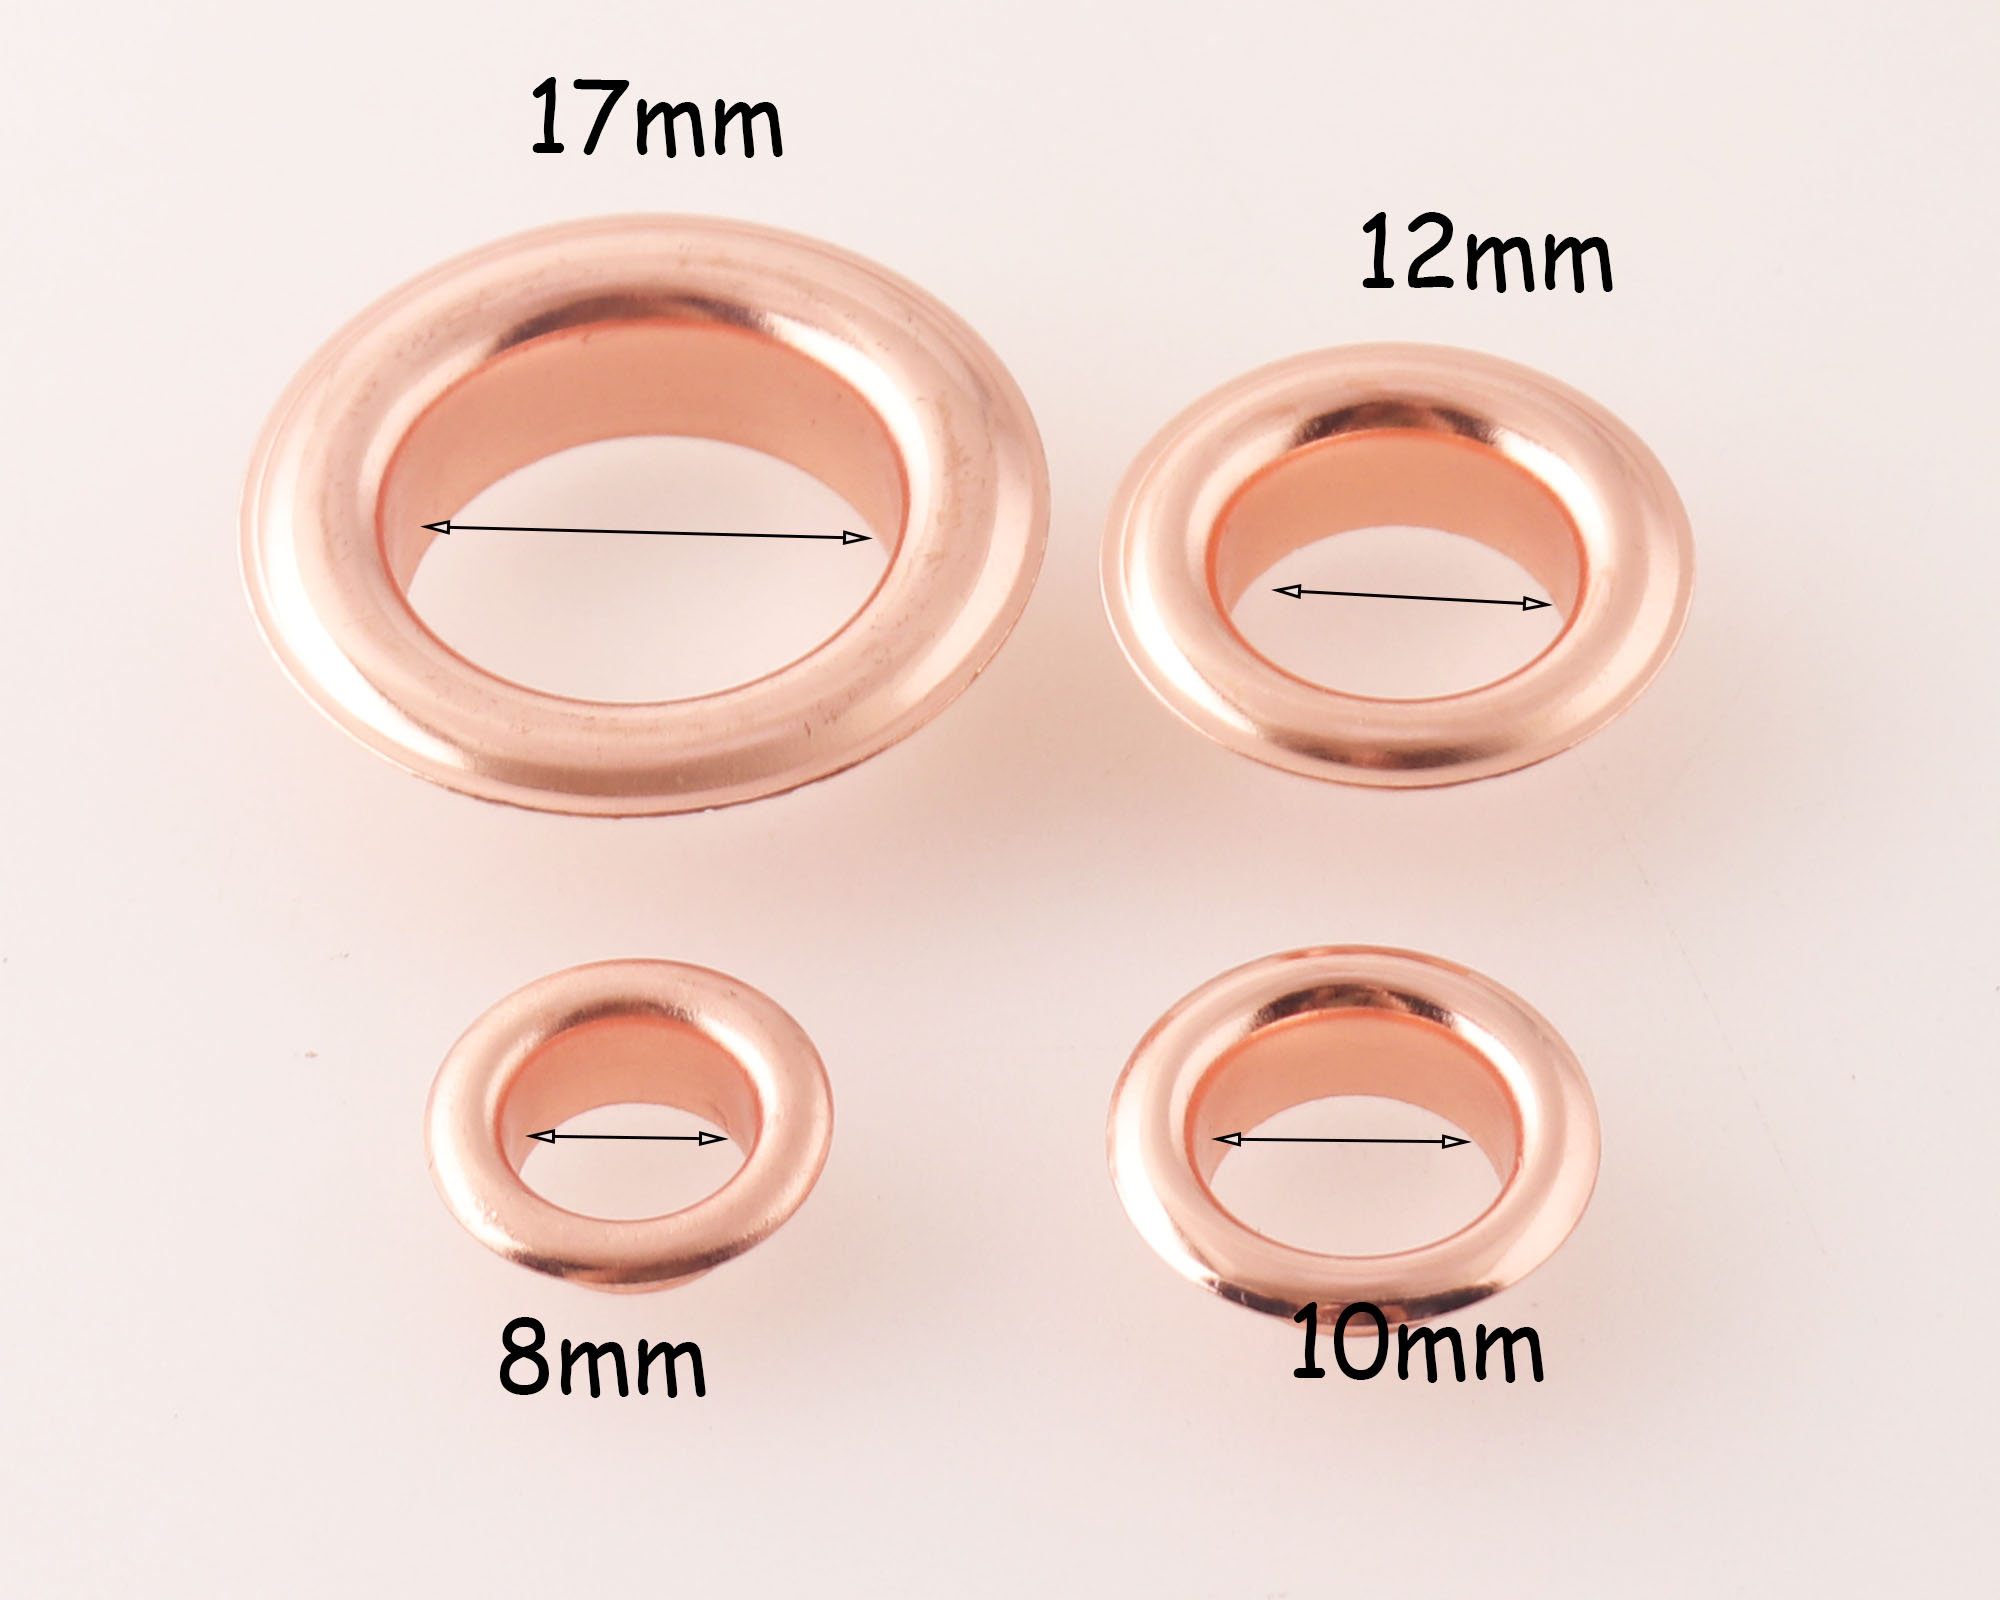 Hole Metal Eyelets Grommets Copper Color,with Washer 12mm 100PCS